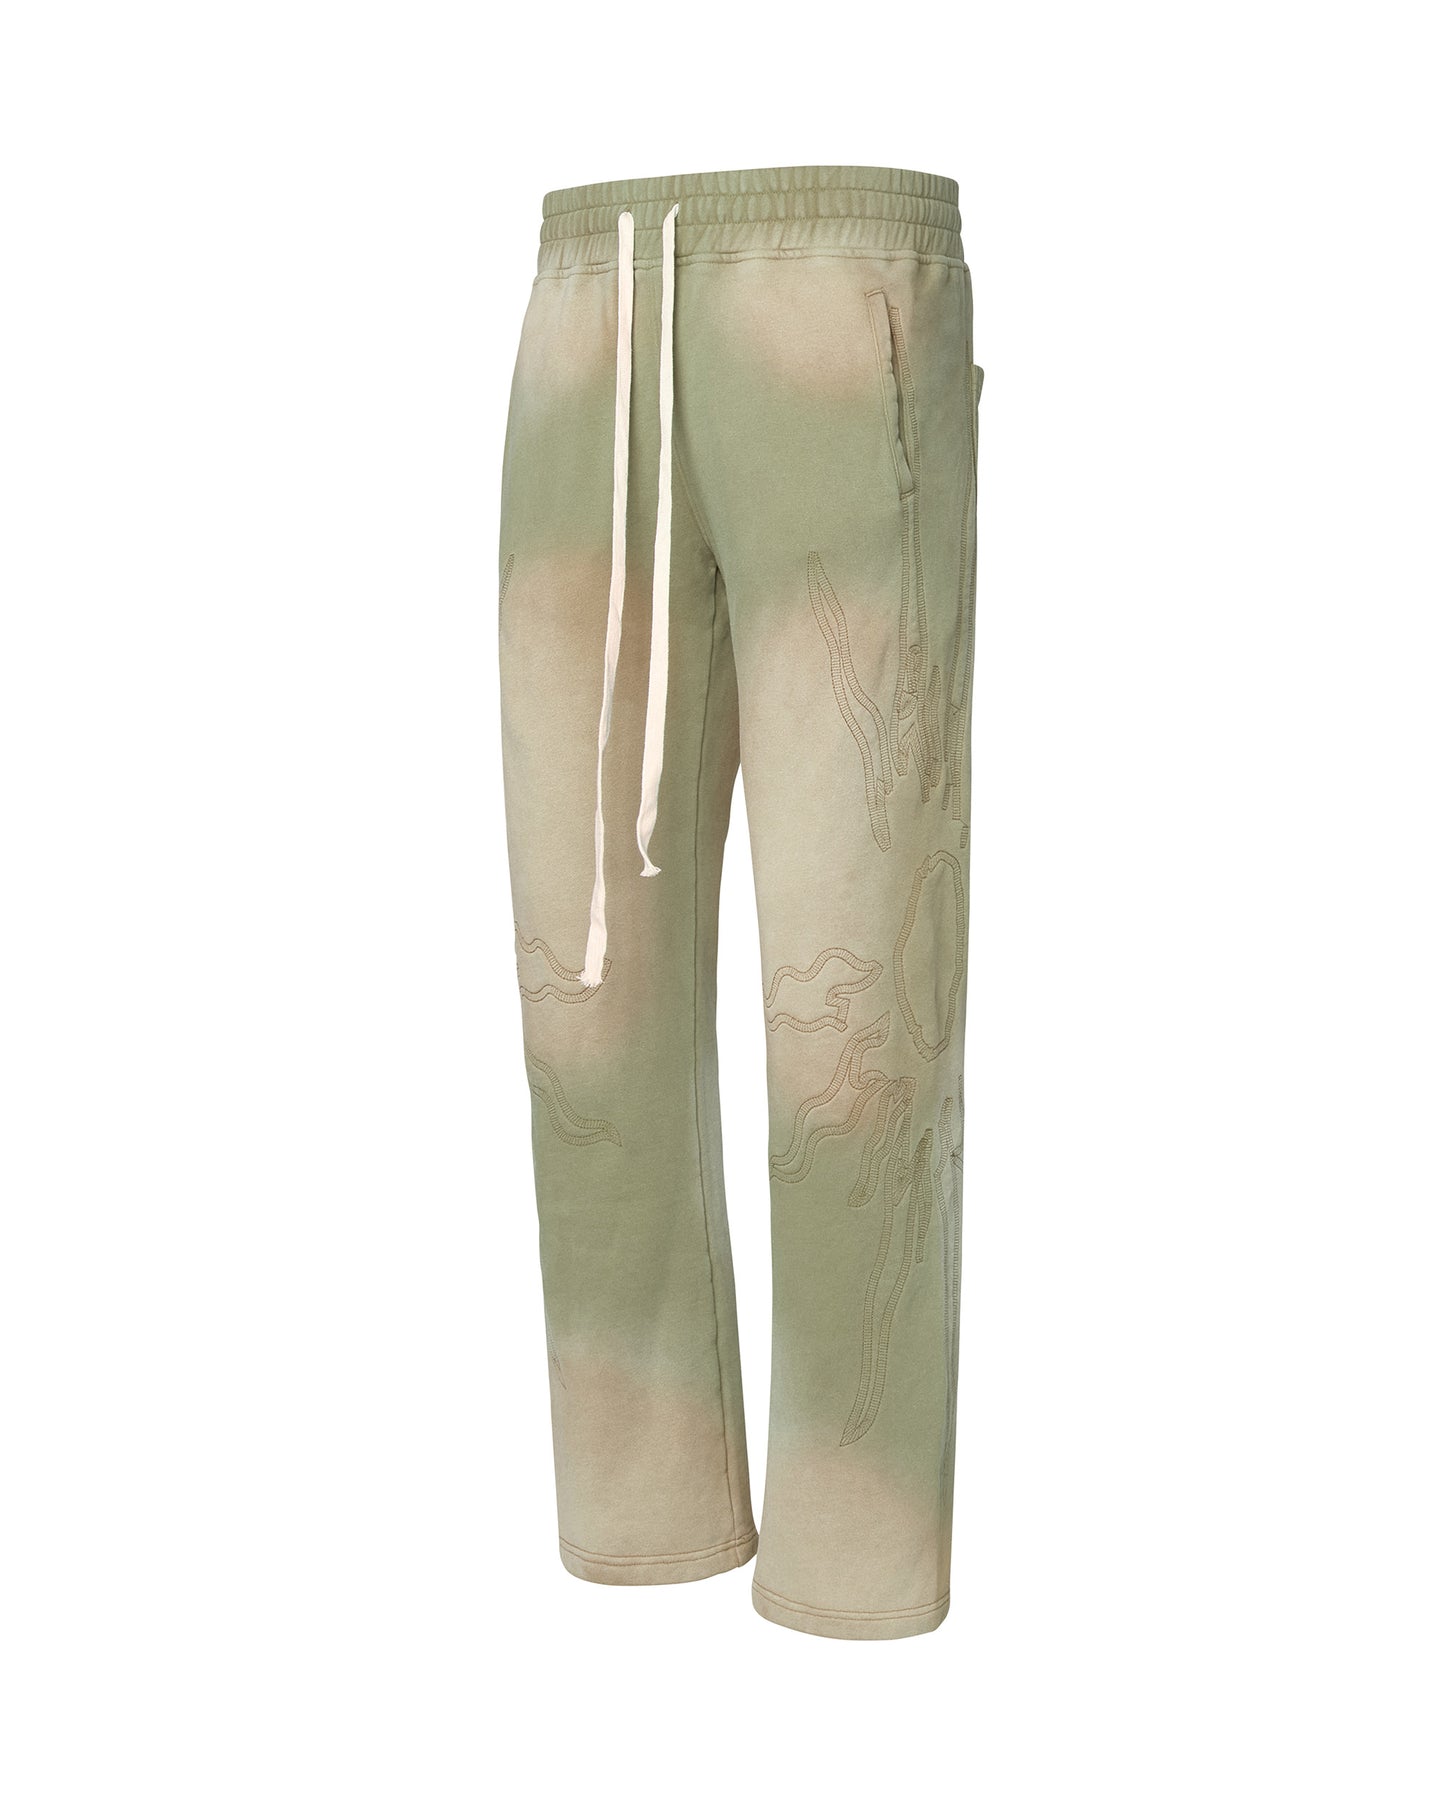 VALE VALLEY FOREST SWEATPANTS